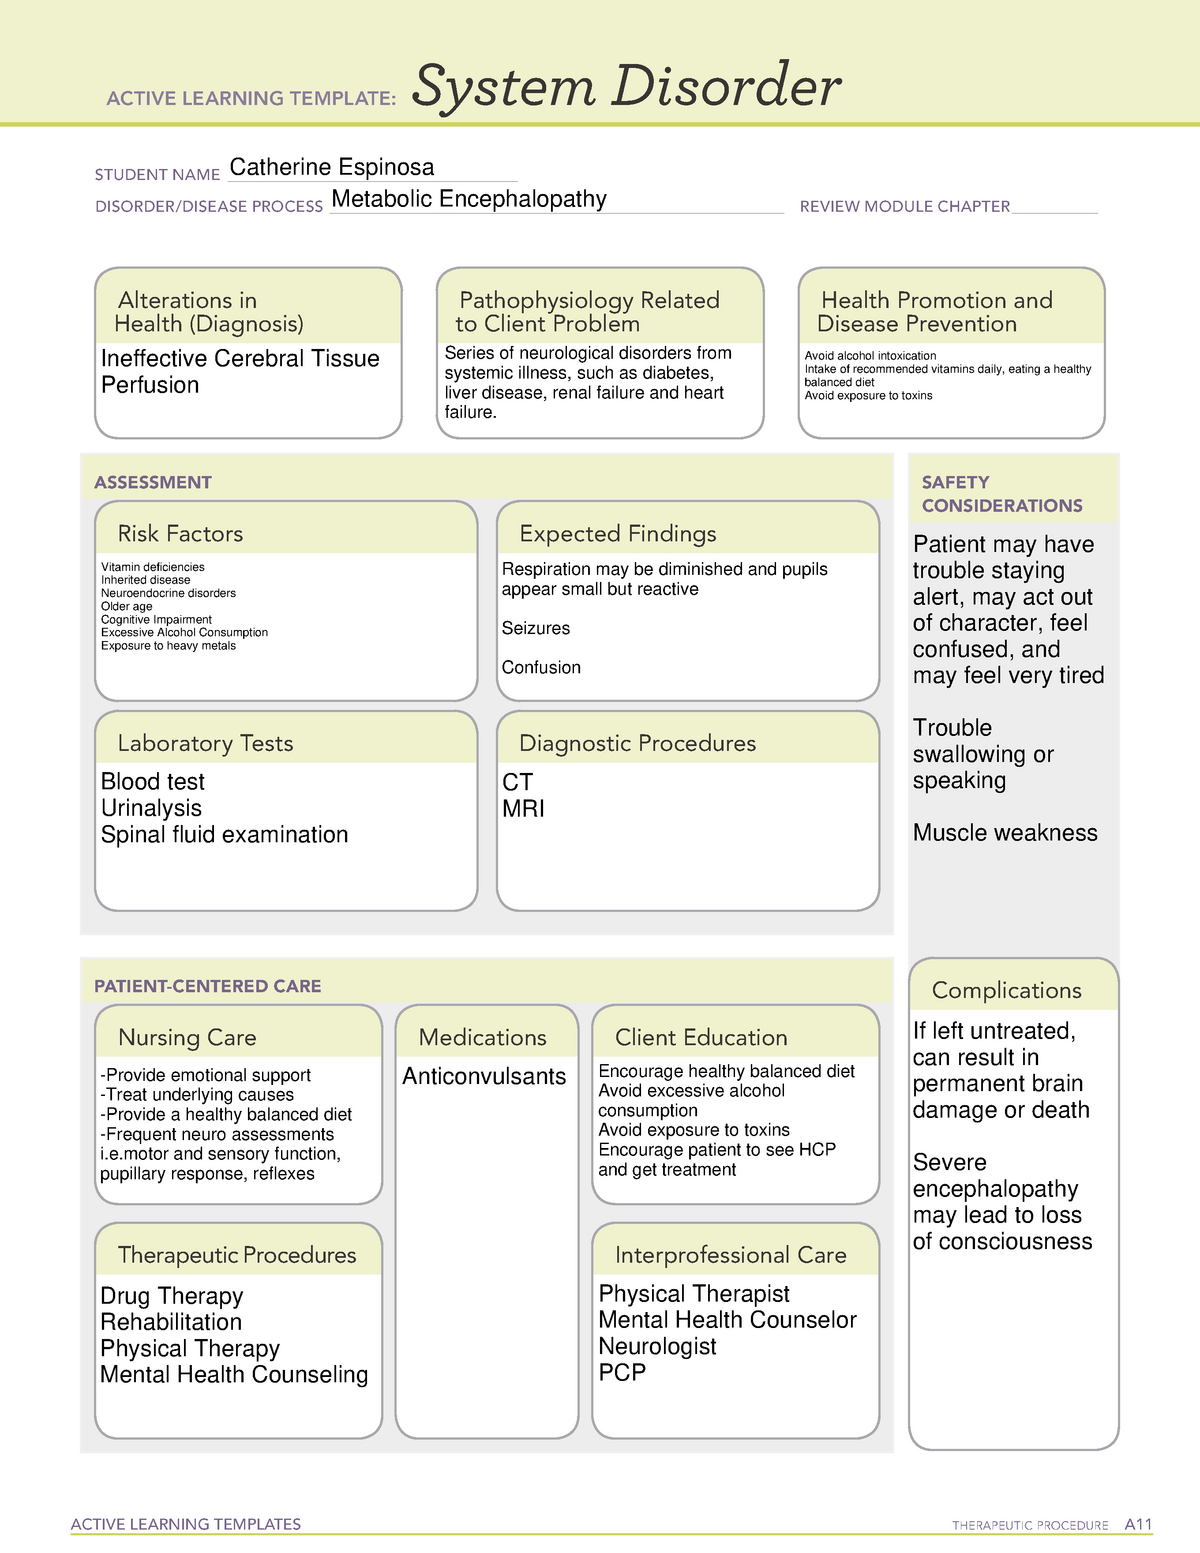 Metabolic Encephalopathy System Disorder ACTIVE LEARNING TEMPLATES